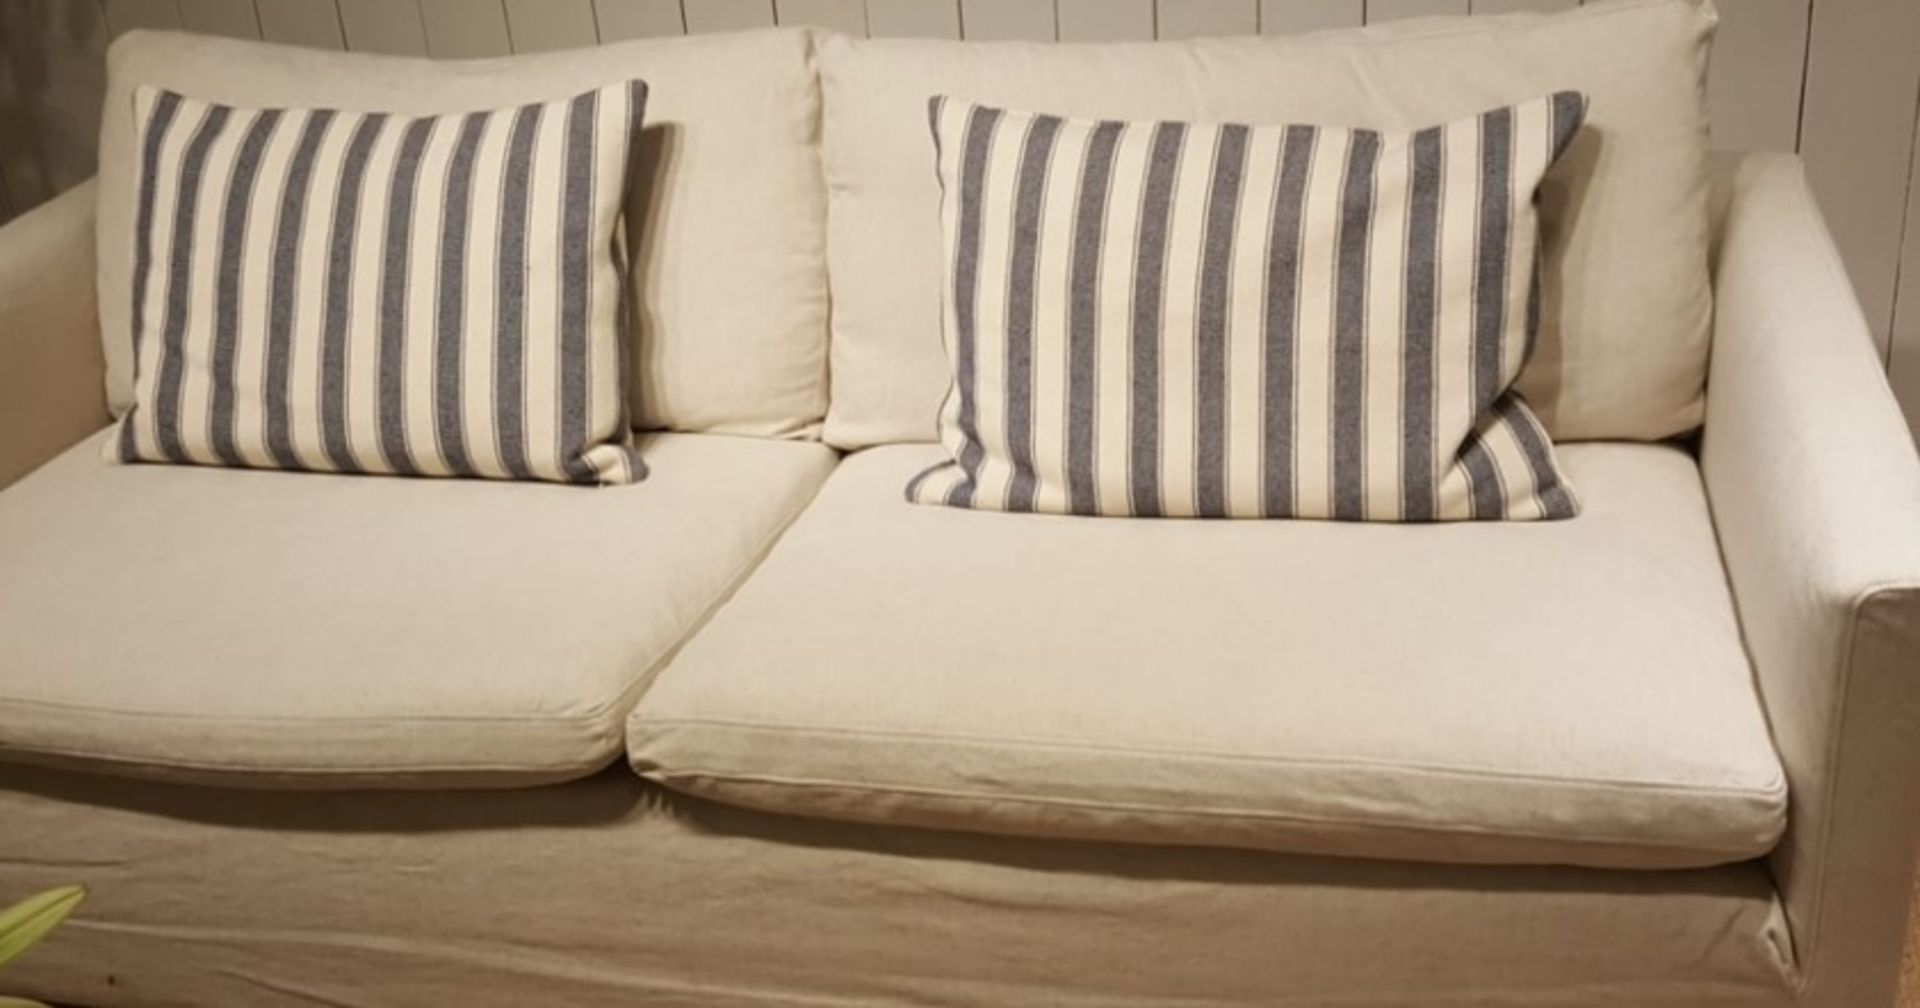 Baja Cushion Rectangular Regal Stripe The Baja Cushions In Thick Yet Soft Linens. Each Finish Is - Image 2 of 2